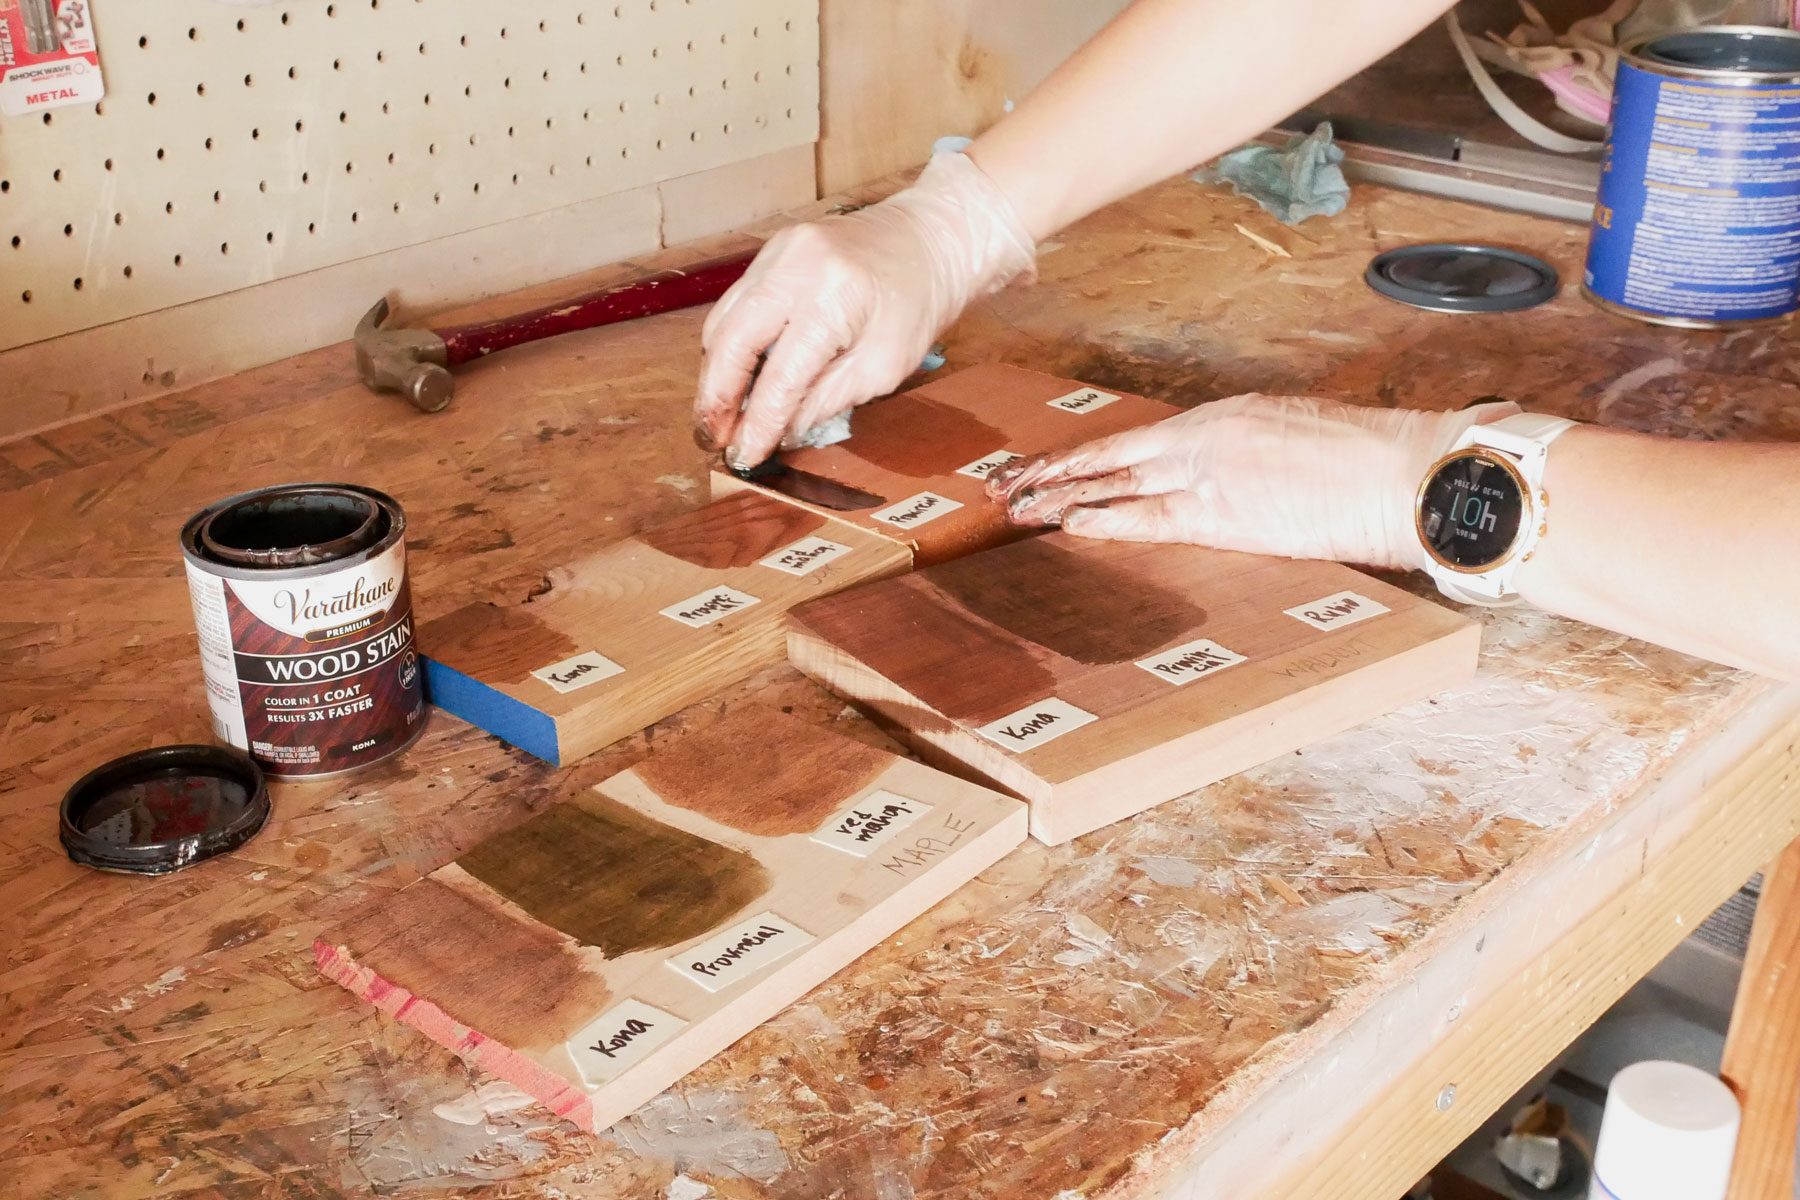 A person applying test stains on wooden boards